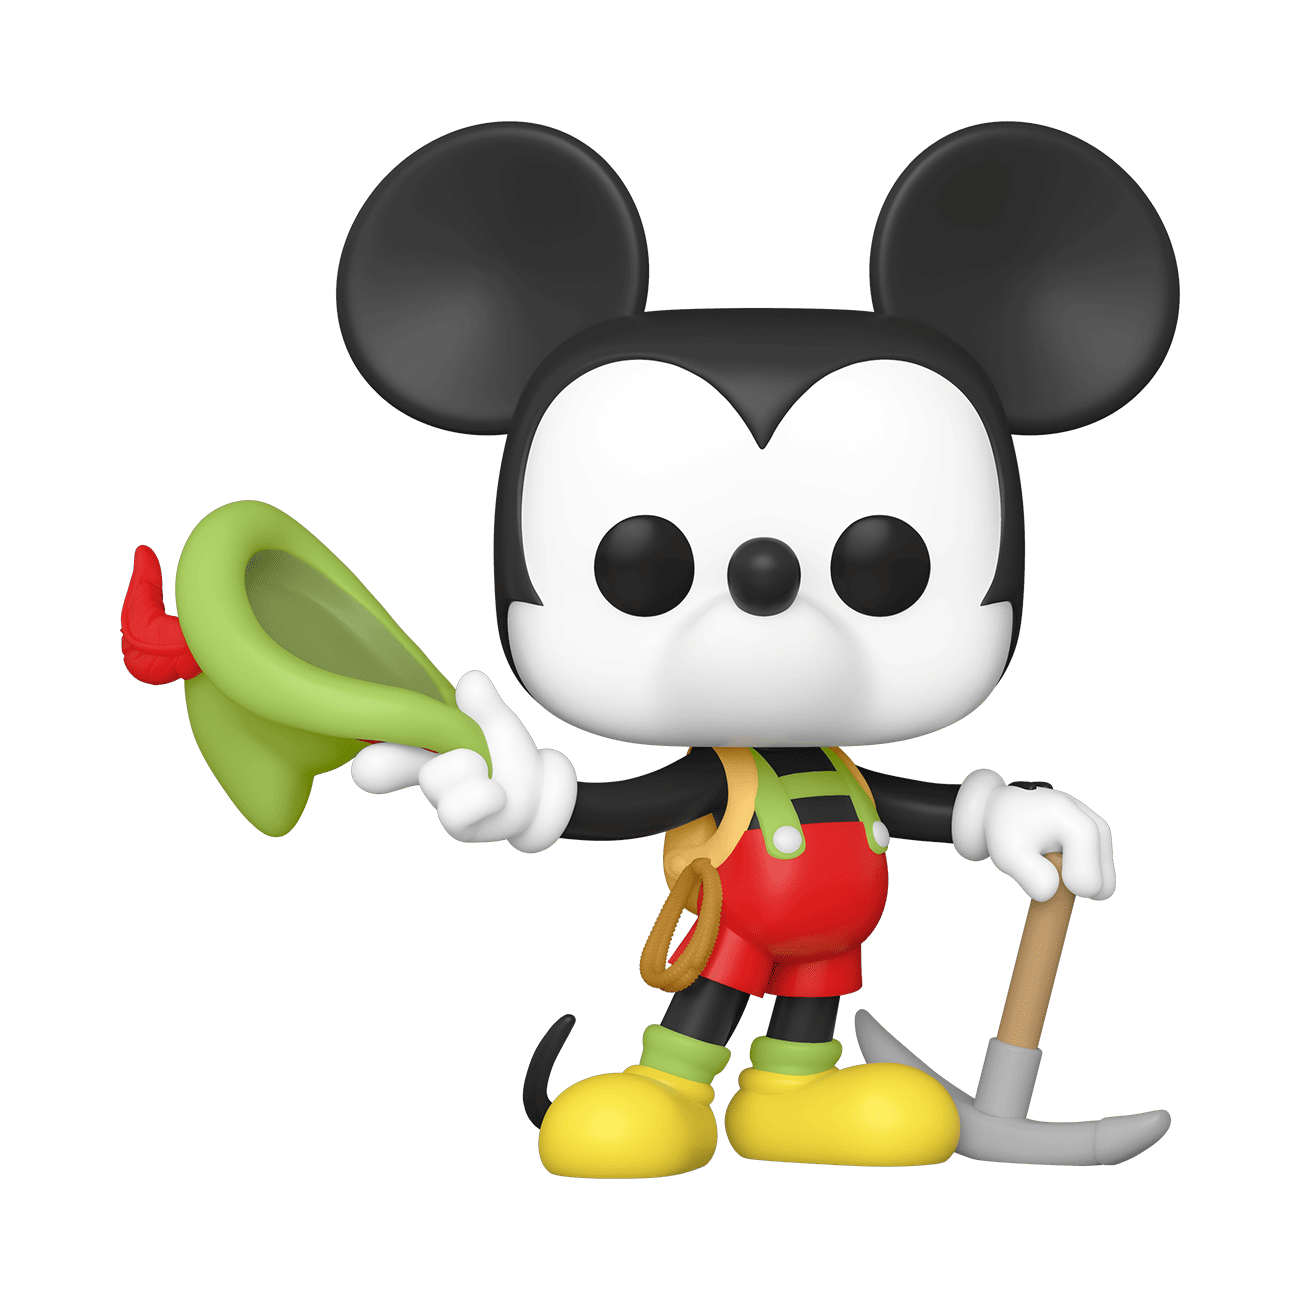 Buy Pop! Matterhorn Bobsleds Mickey Mouse at Funko.